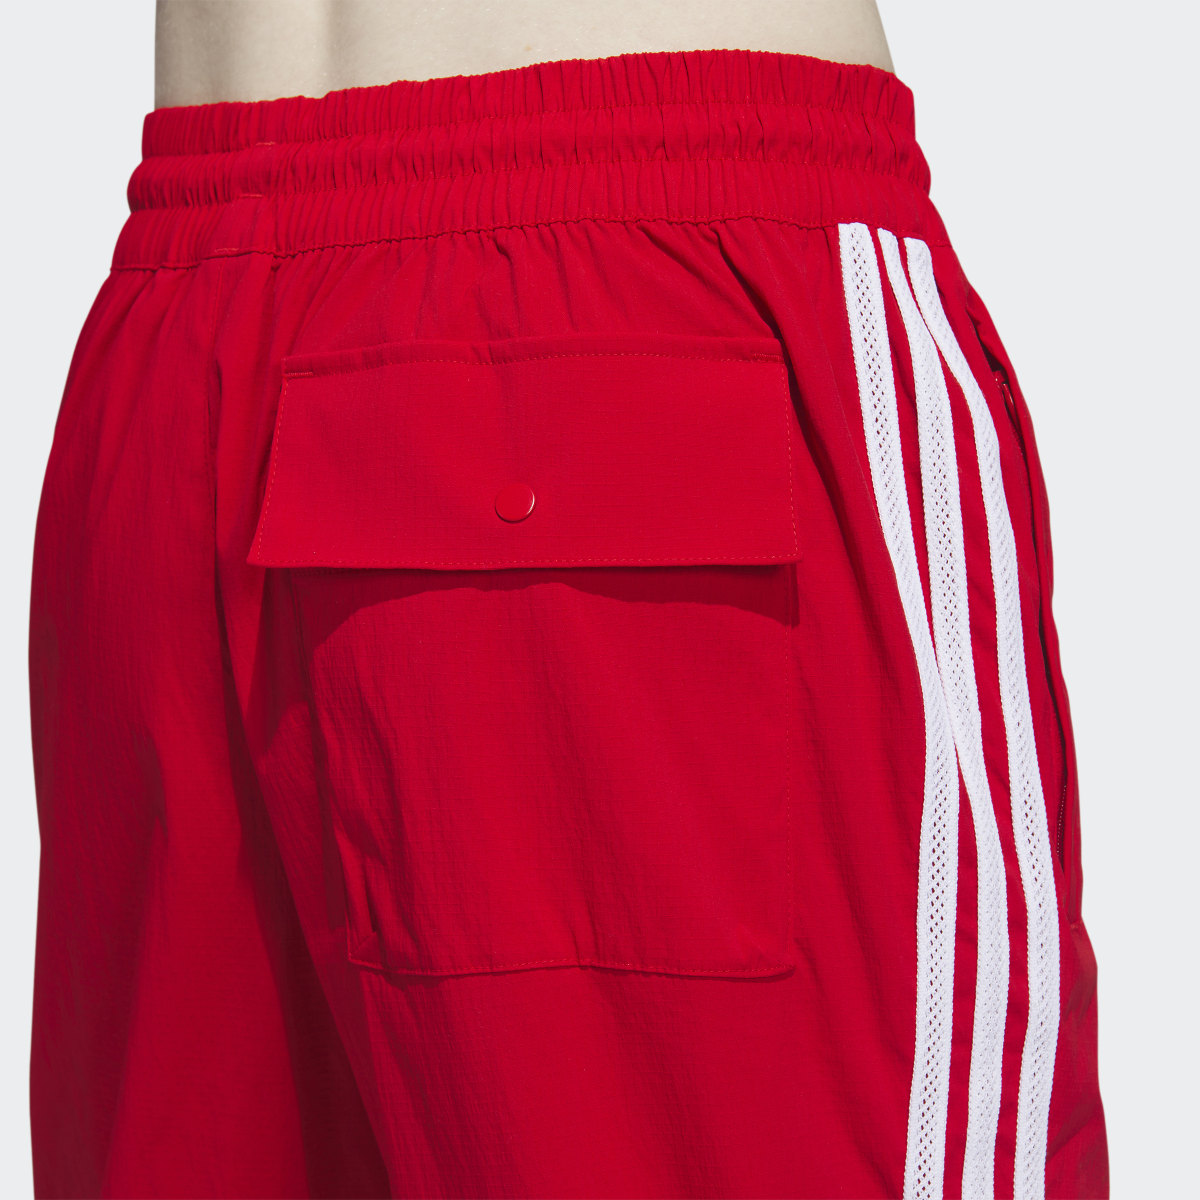 Adidas Woven Tracksuit Bottoms. 6